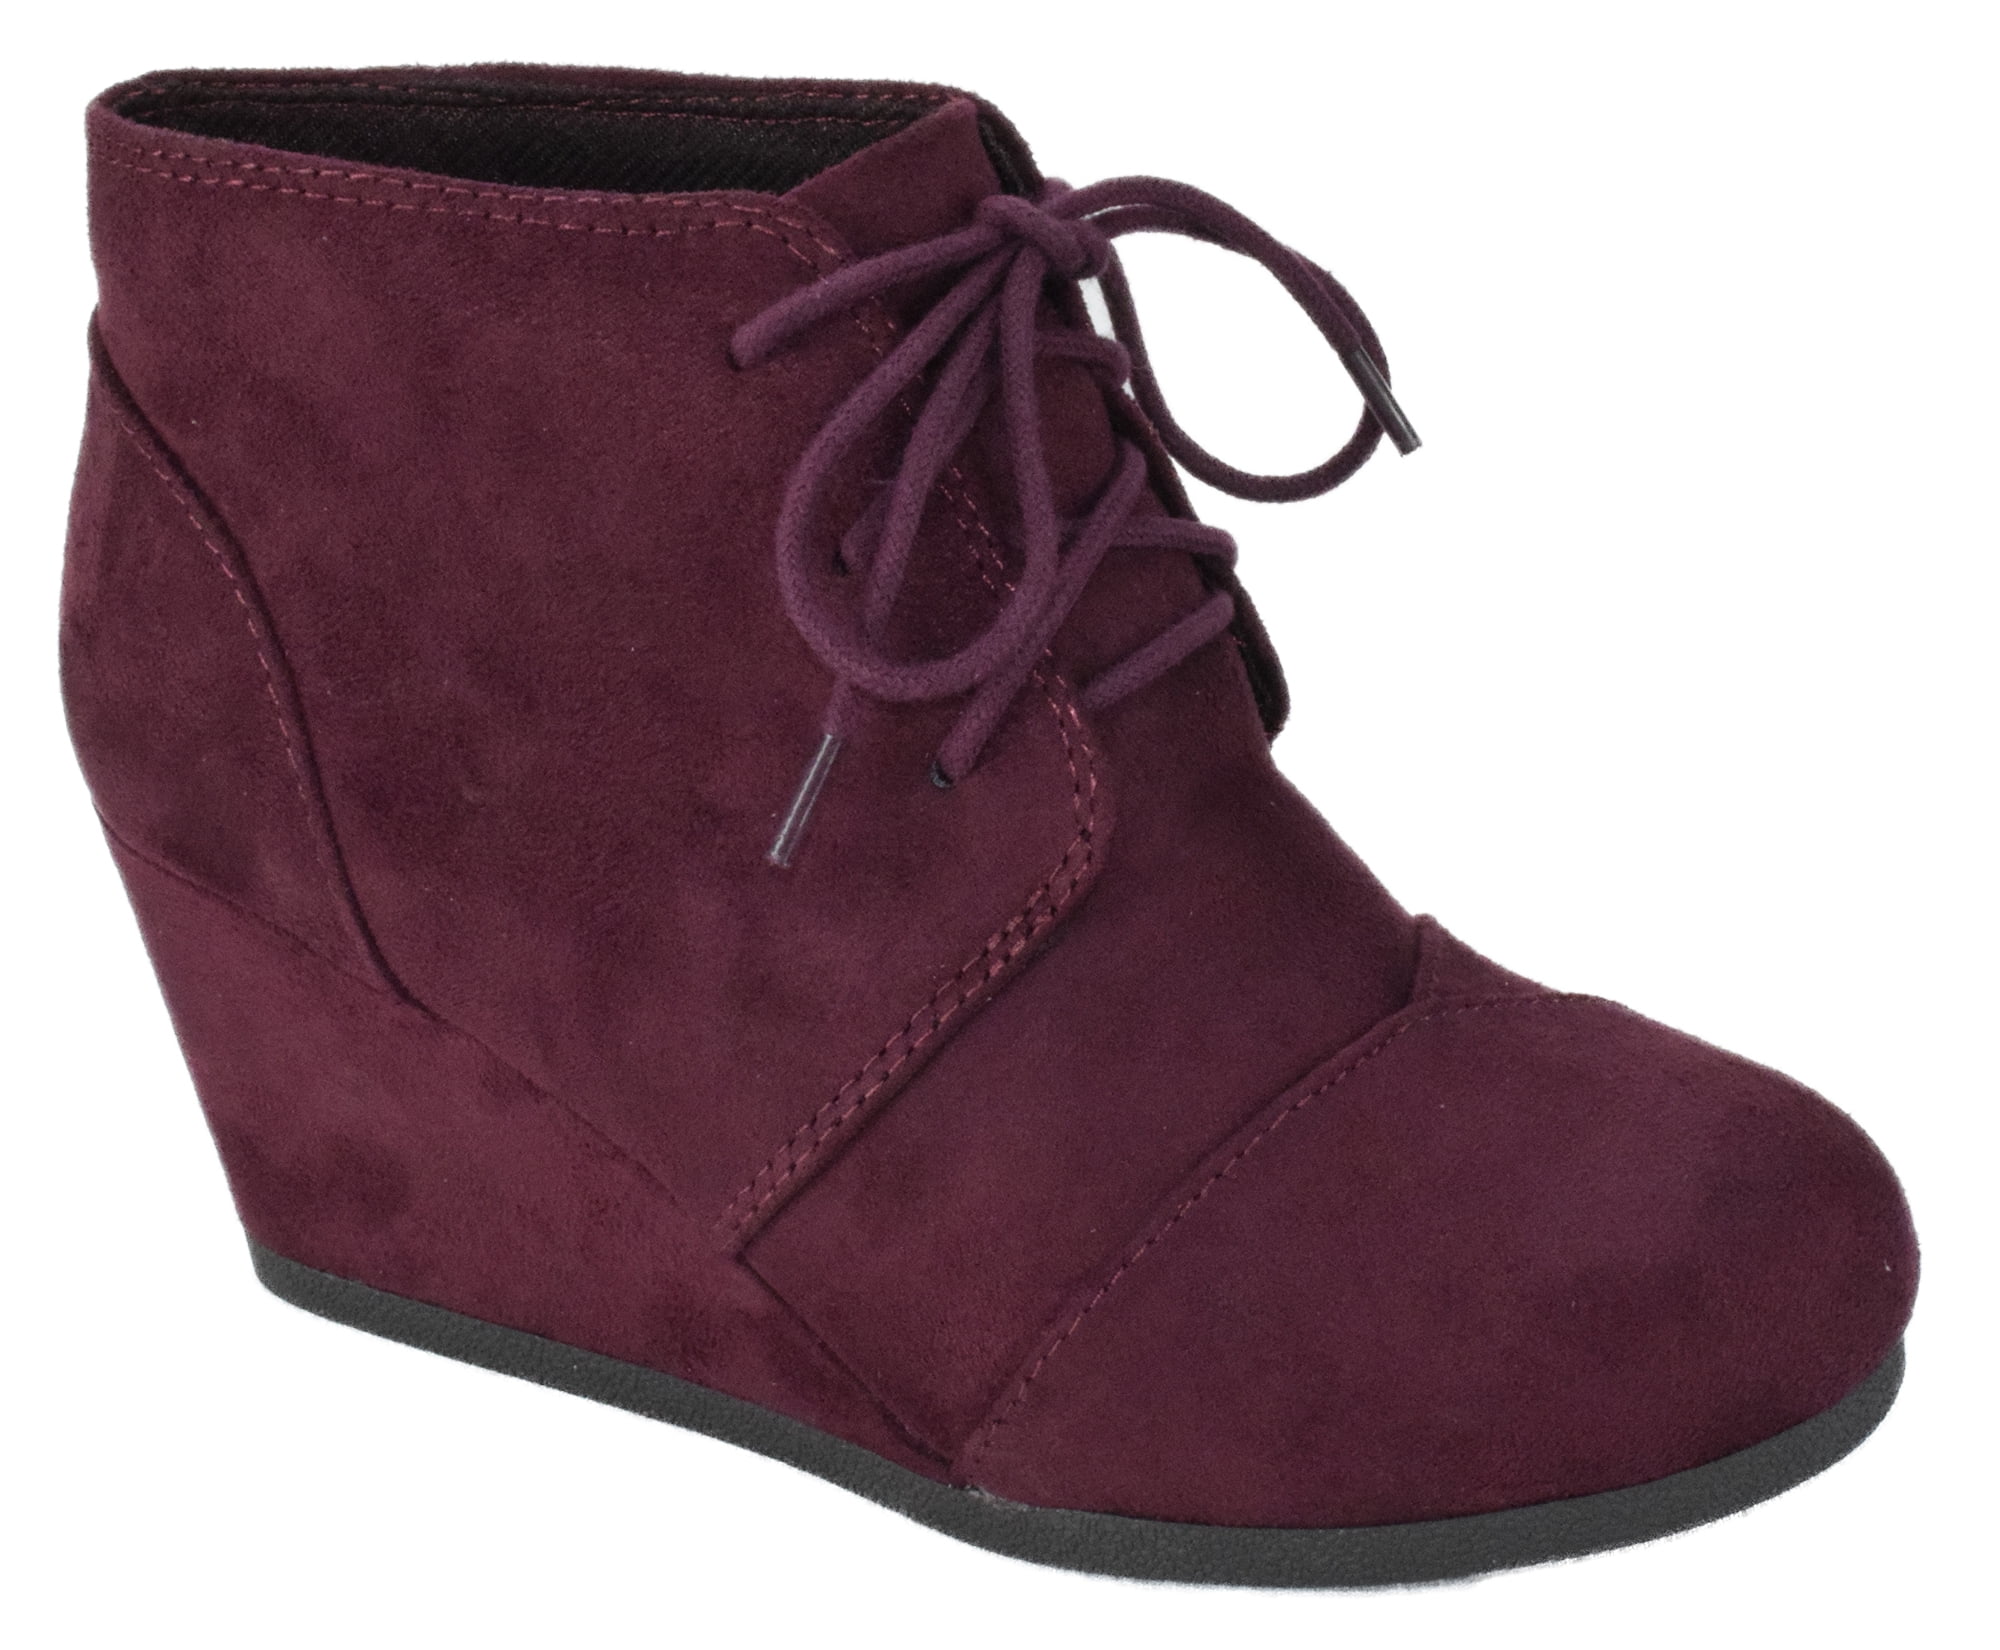 City Classified REX-S Women's Lace Up Wedge High Heel Bootie Boots 